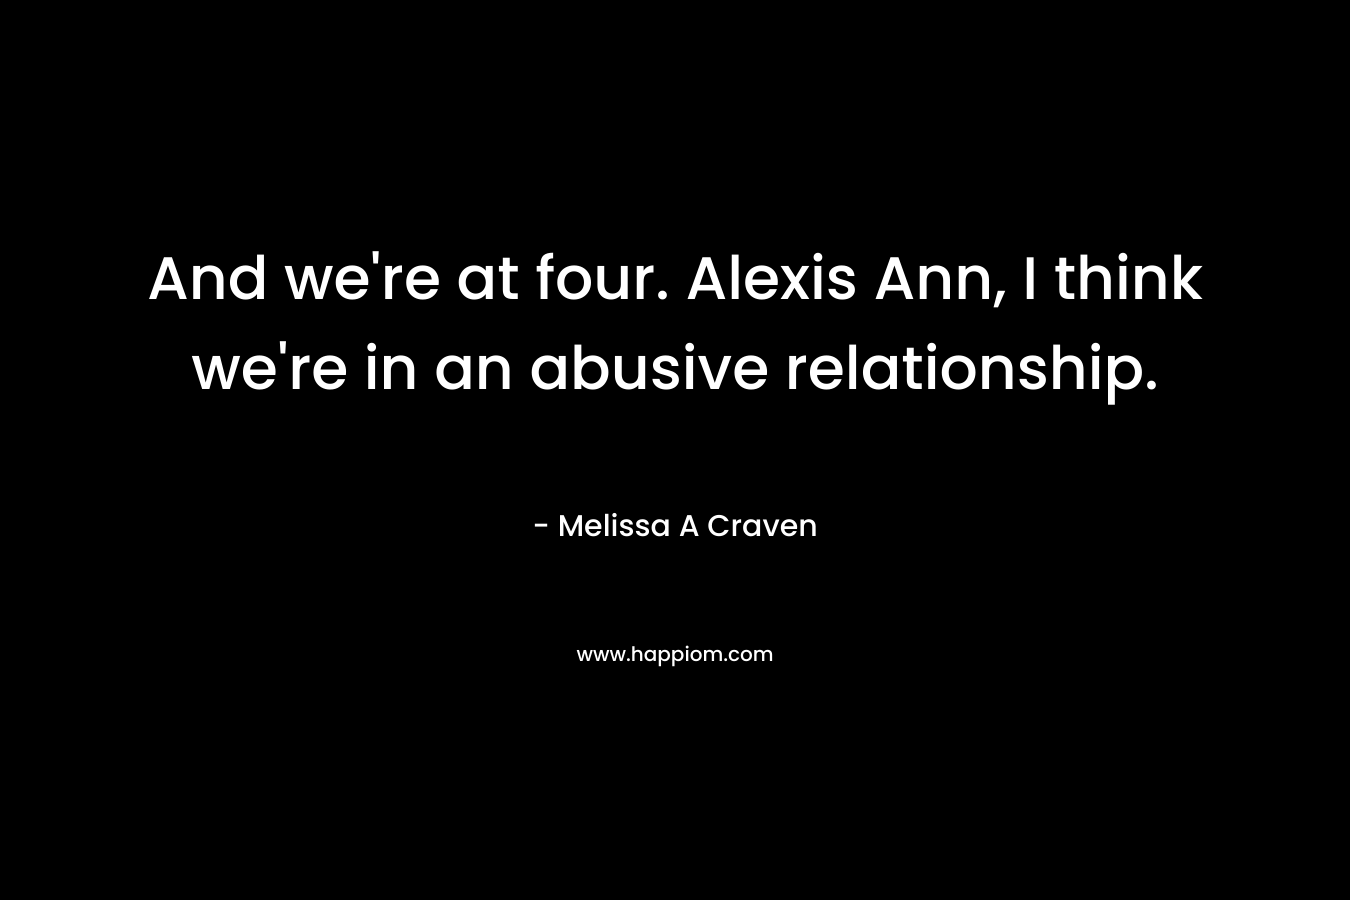 And we’re at four. Alexis Ann, I think we’re in an abusive relationship. – Melissa A Craven